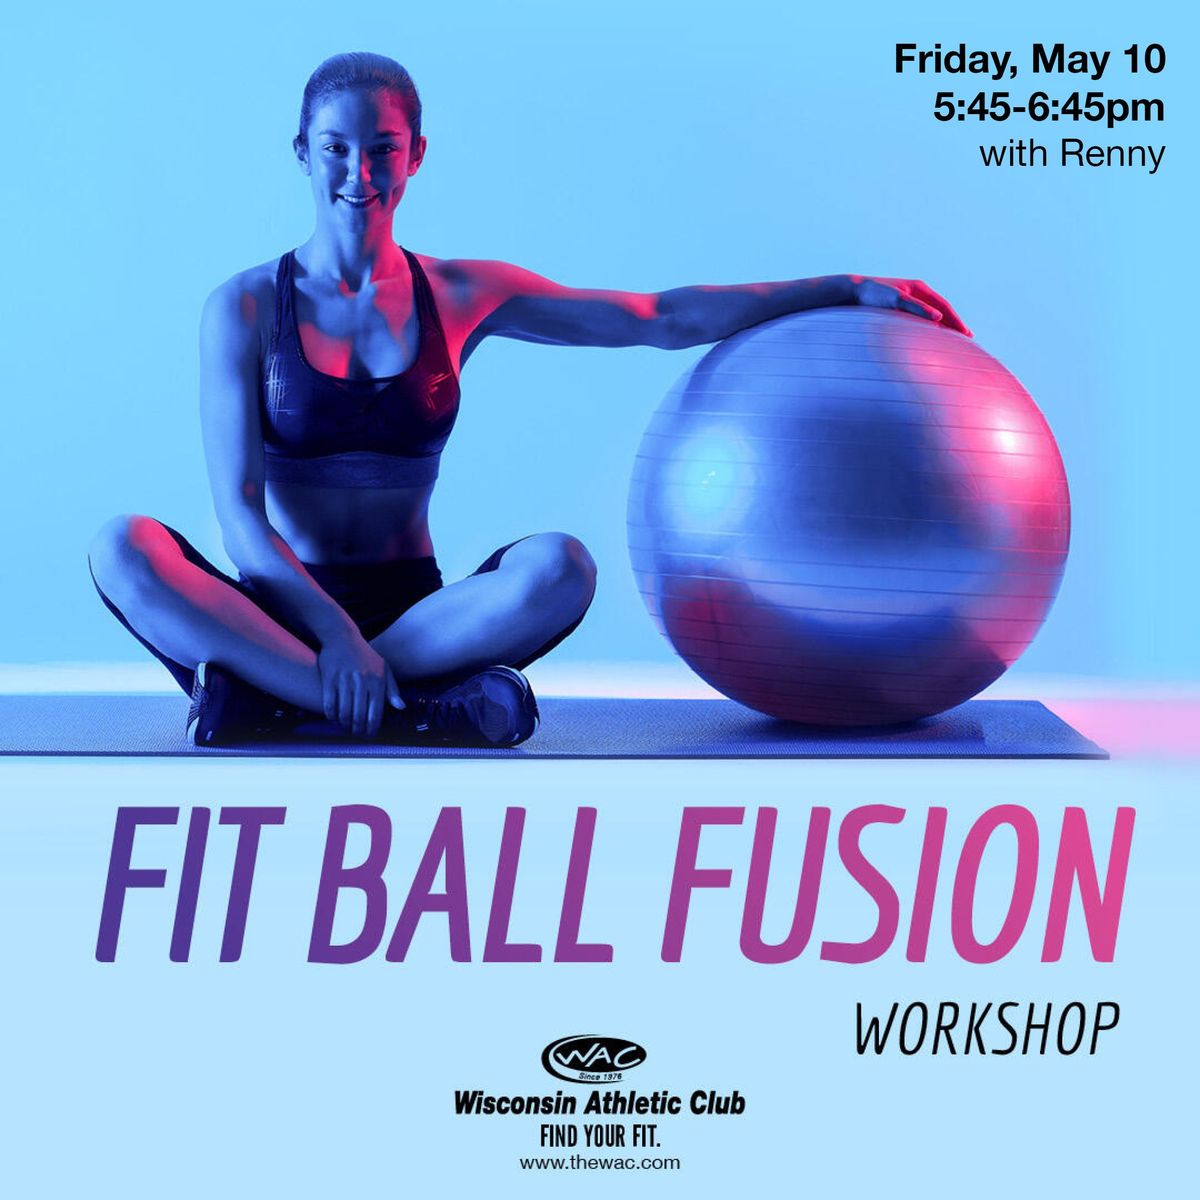 Fit Ball Fusion Workshop